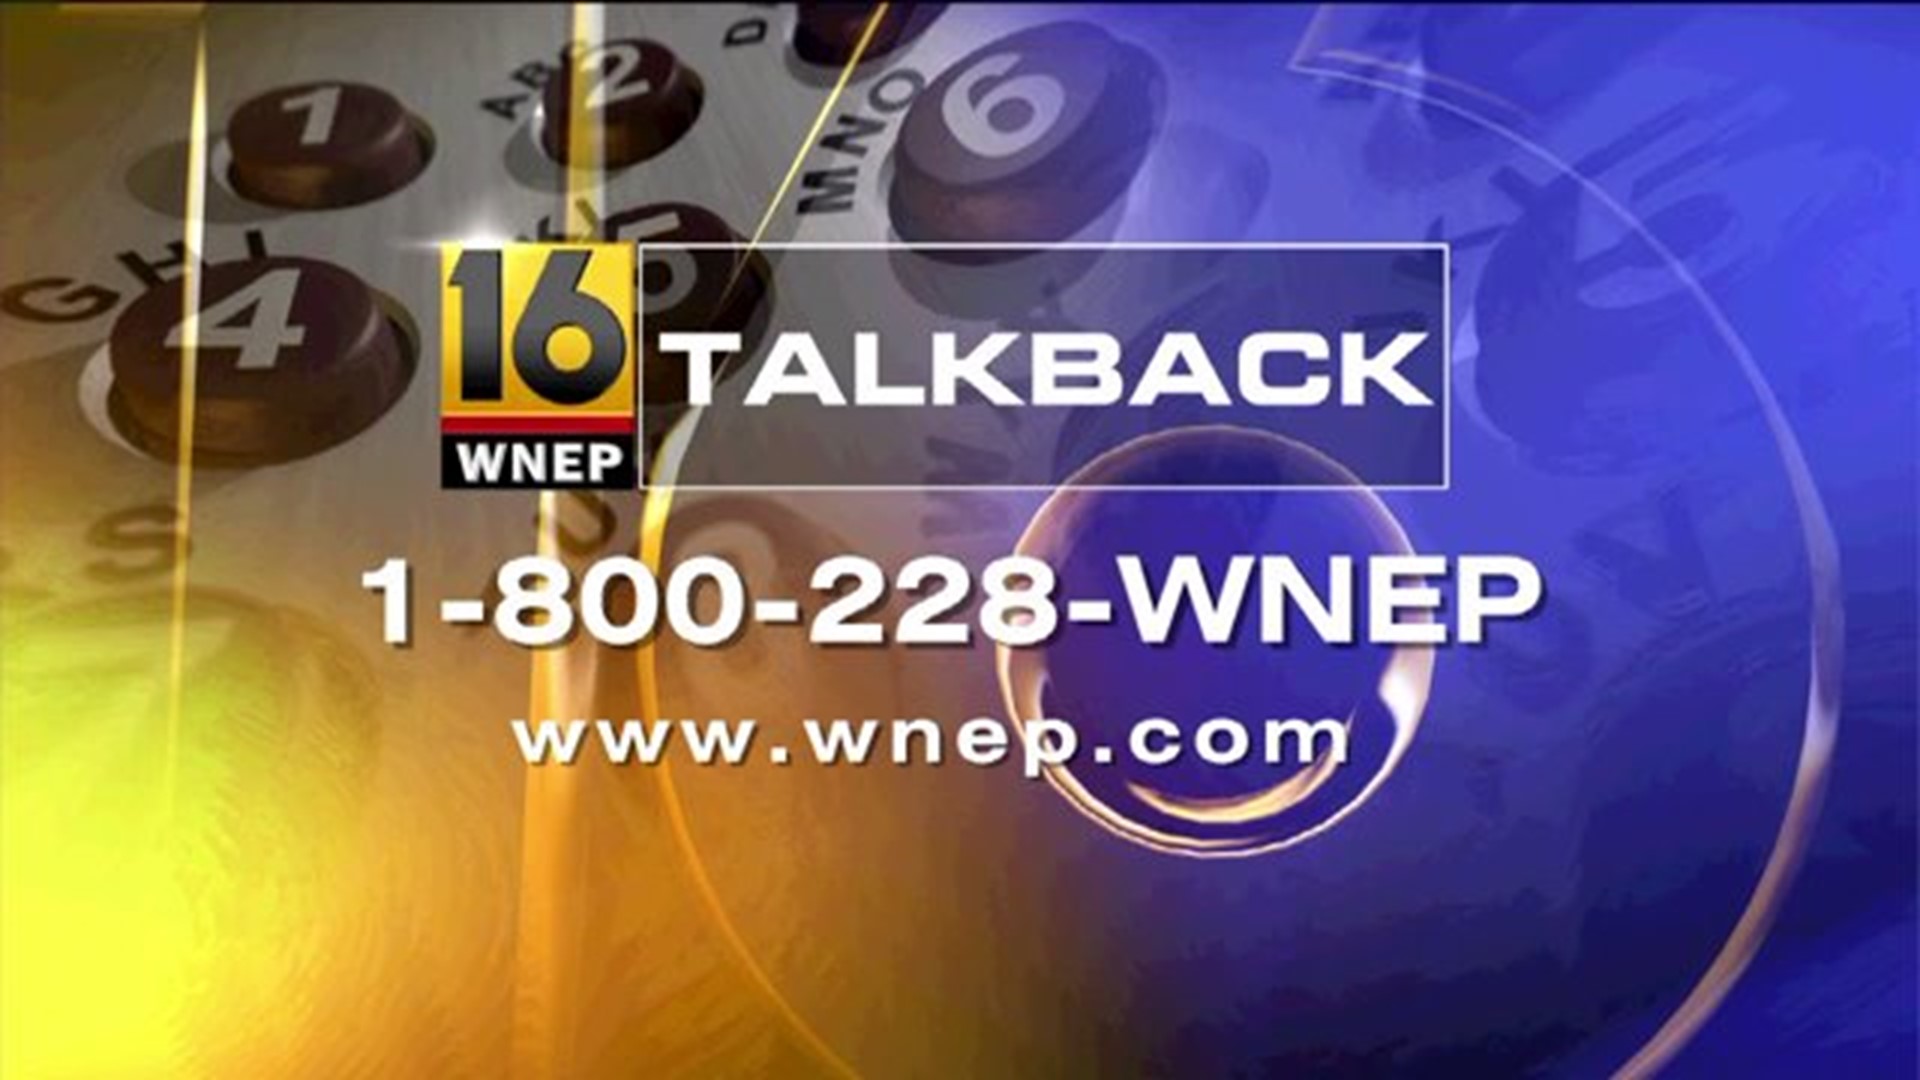 Talkback 16: Kittens, Chickens, and a Theft